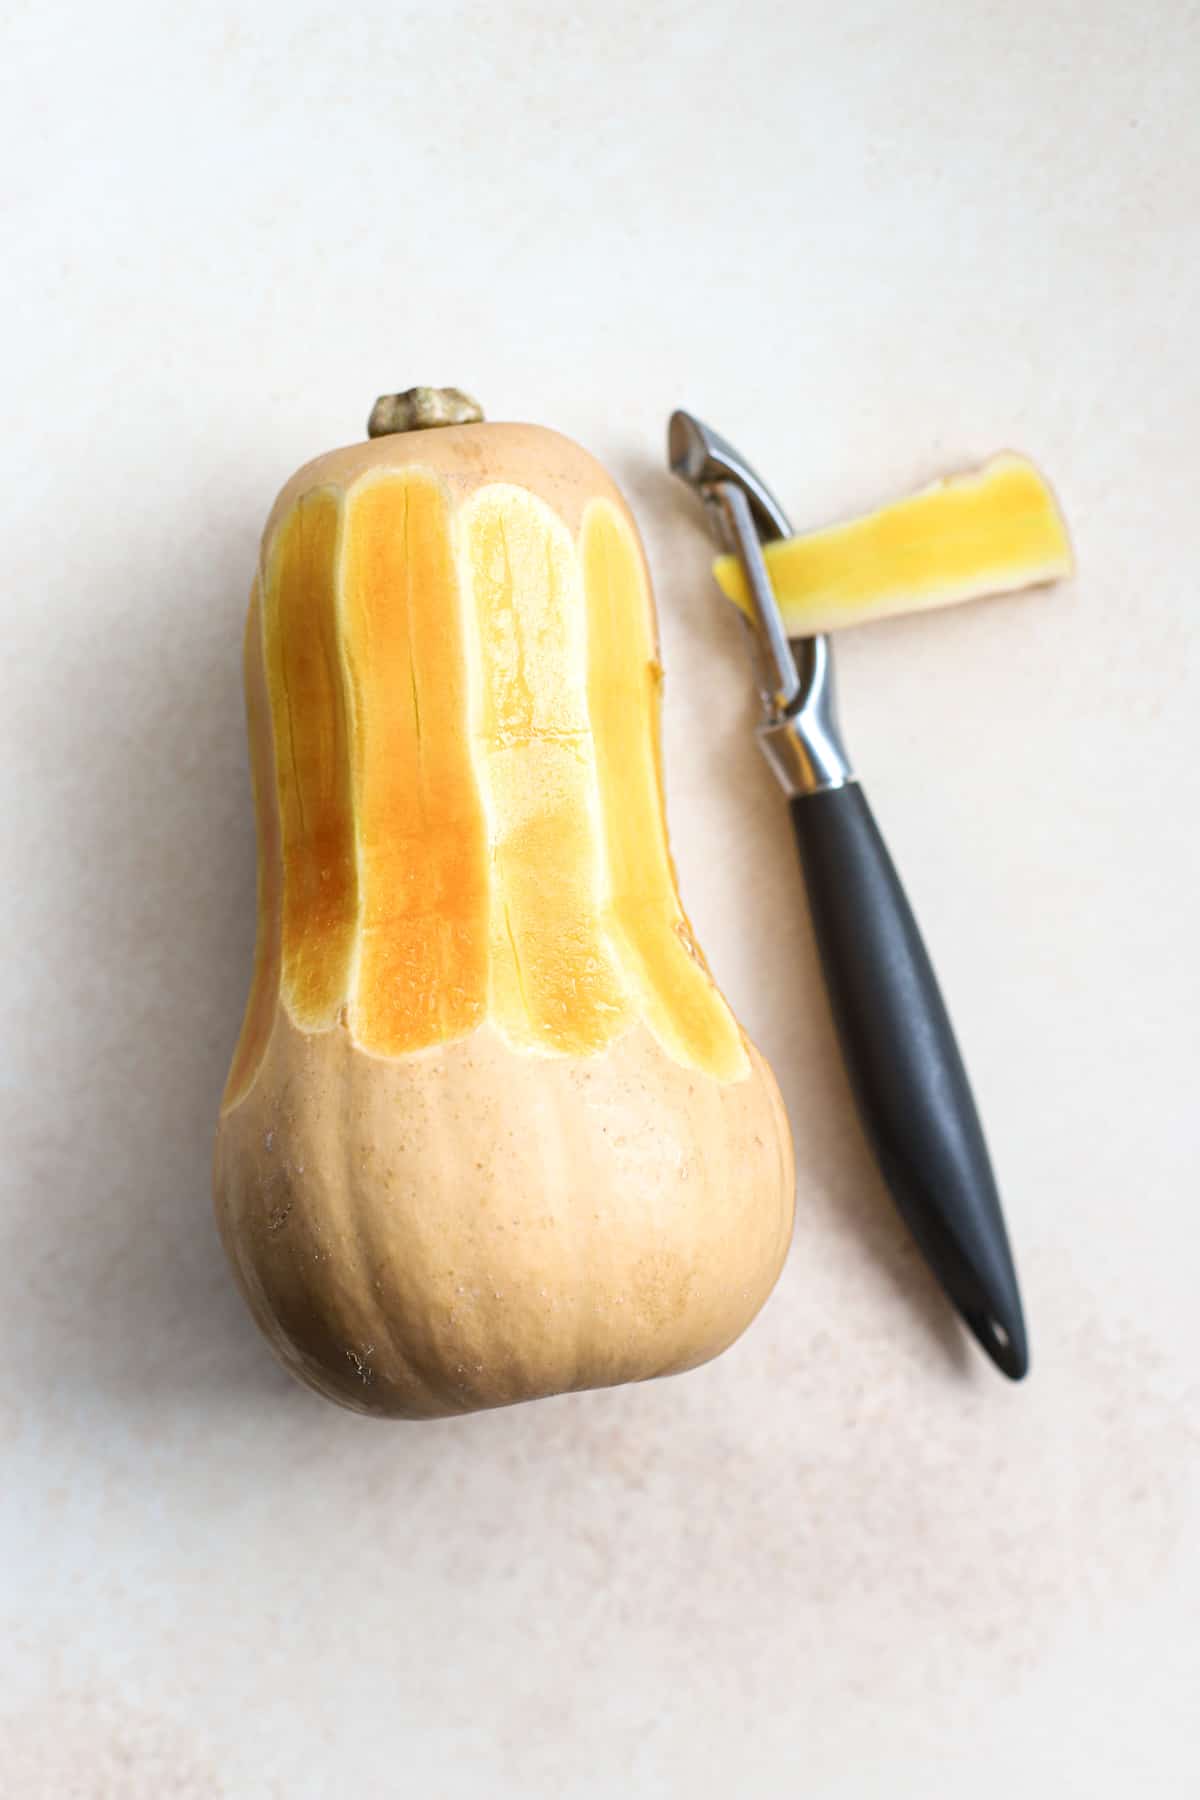 Butternut squash being peeled, next to peeler, on beige and white surface